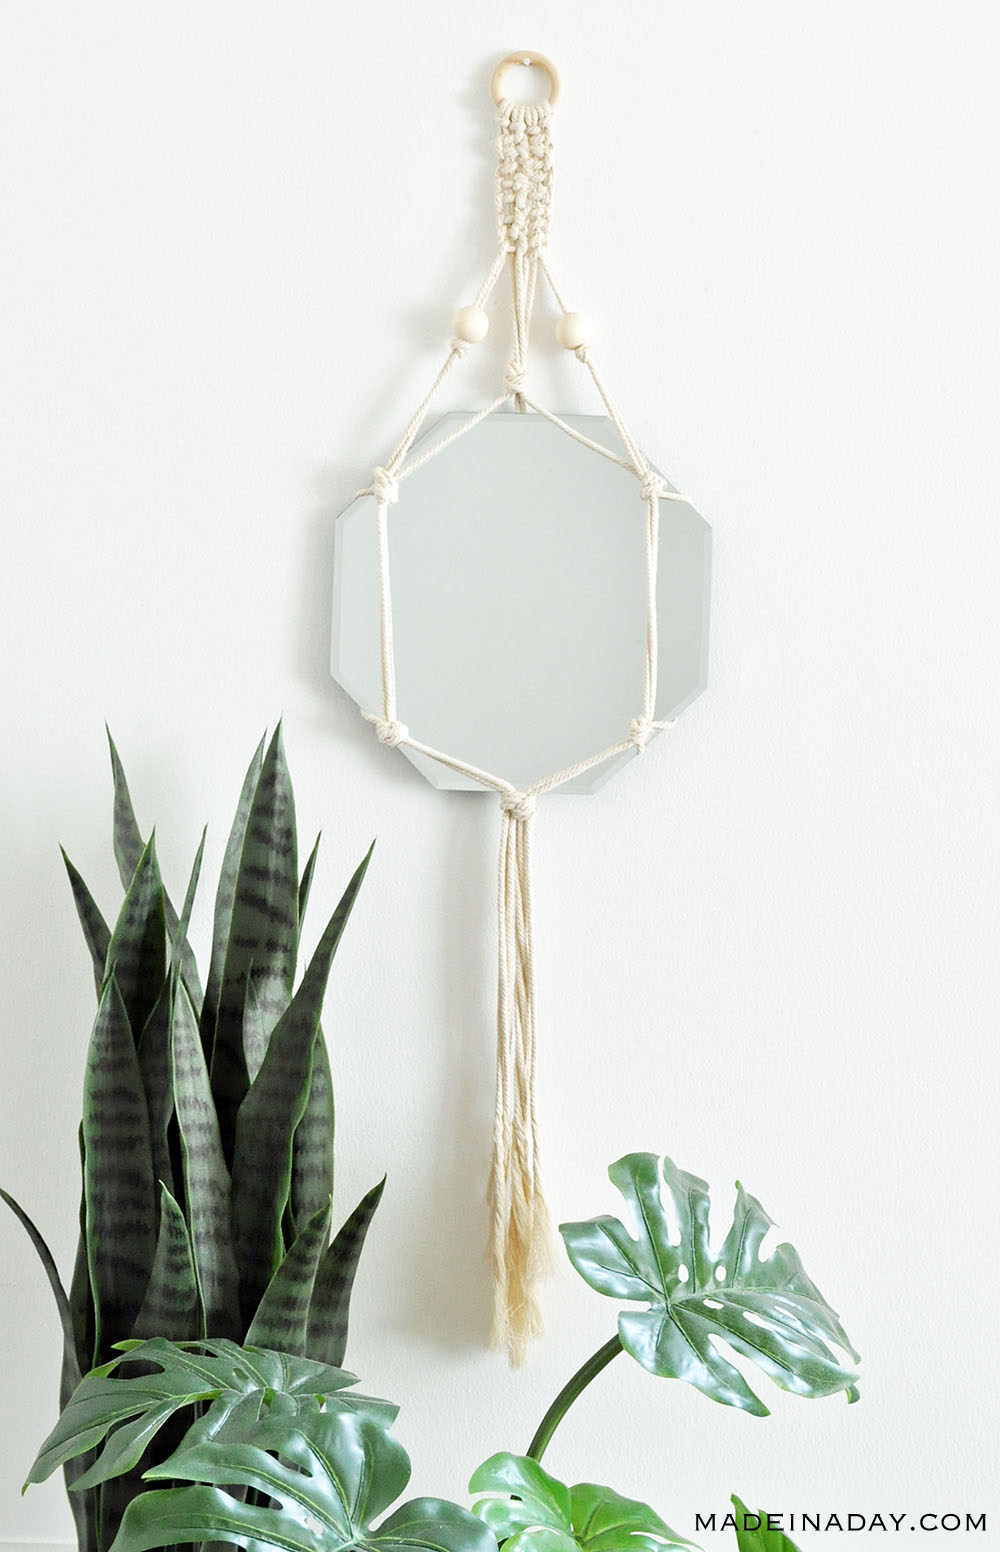 Made in a Day Boho Macrame Mirror / Learn how to make beginner-friendly macrame knots so you can macrame all day!